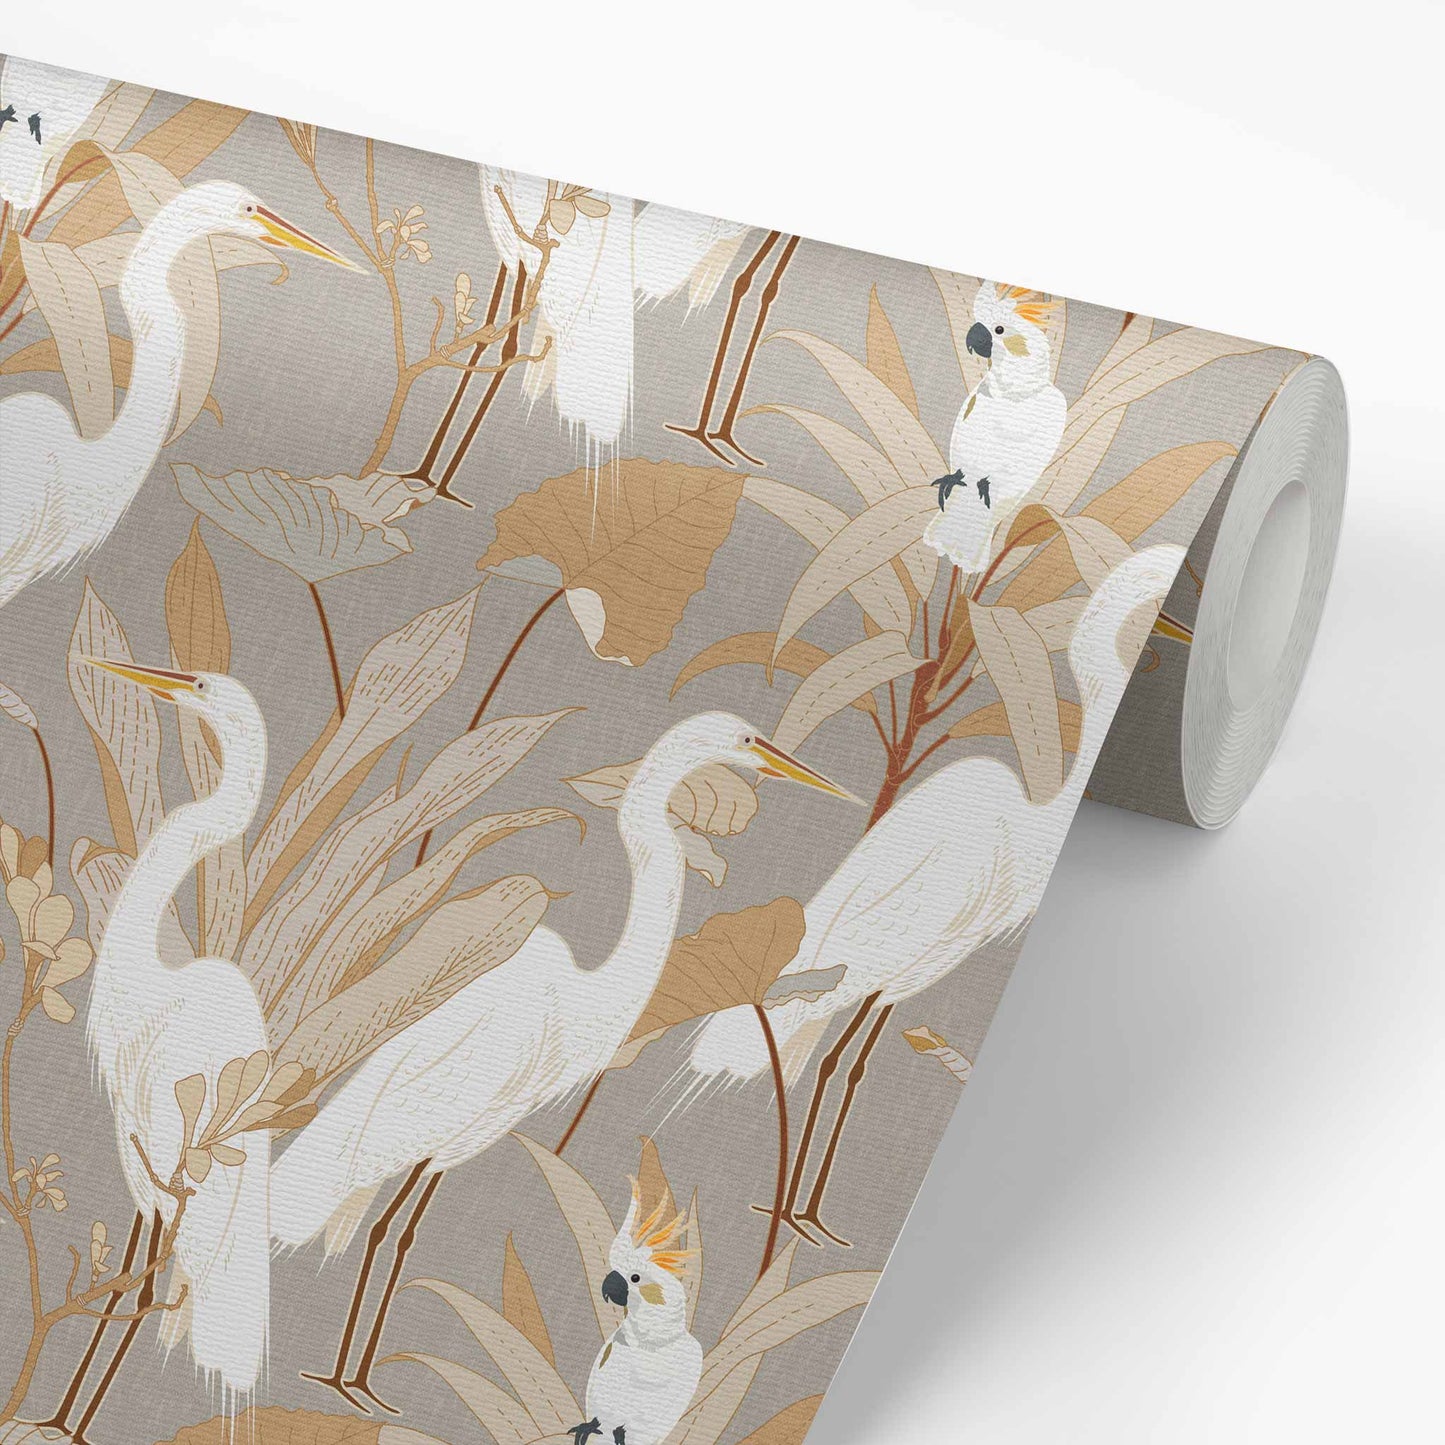 Designed with an eye-catching flair of animals and class, Cranes and Cockatoo Wallpaper - Gray encaptures tasteful luxury. This exclusive wallpaper features a sophisticated design of cranes and cockatoos, perfect for bringing a sense of refinement and elegance to your home.